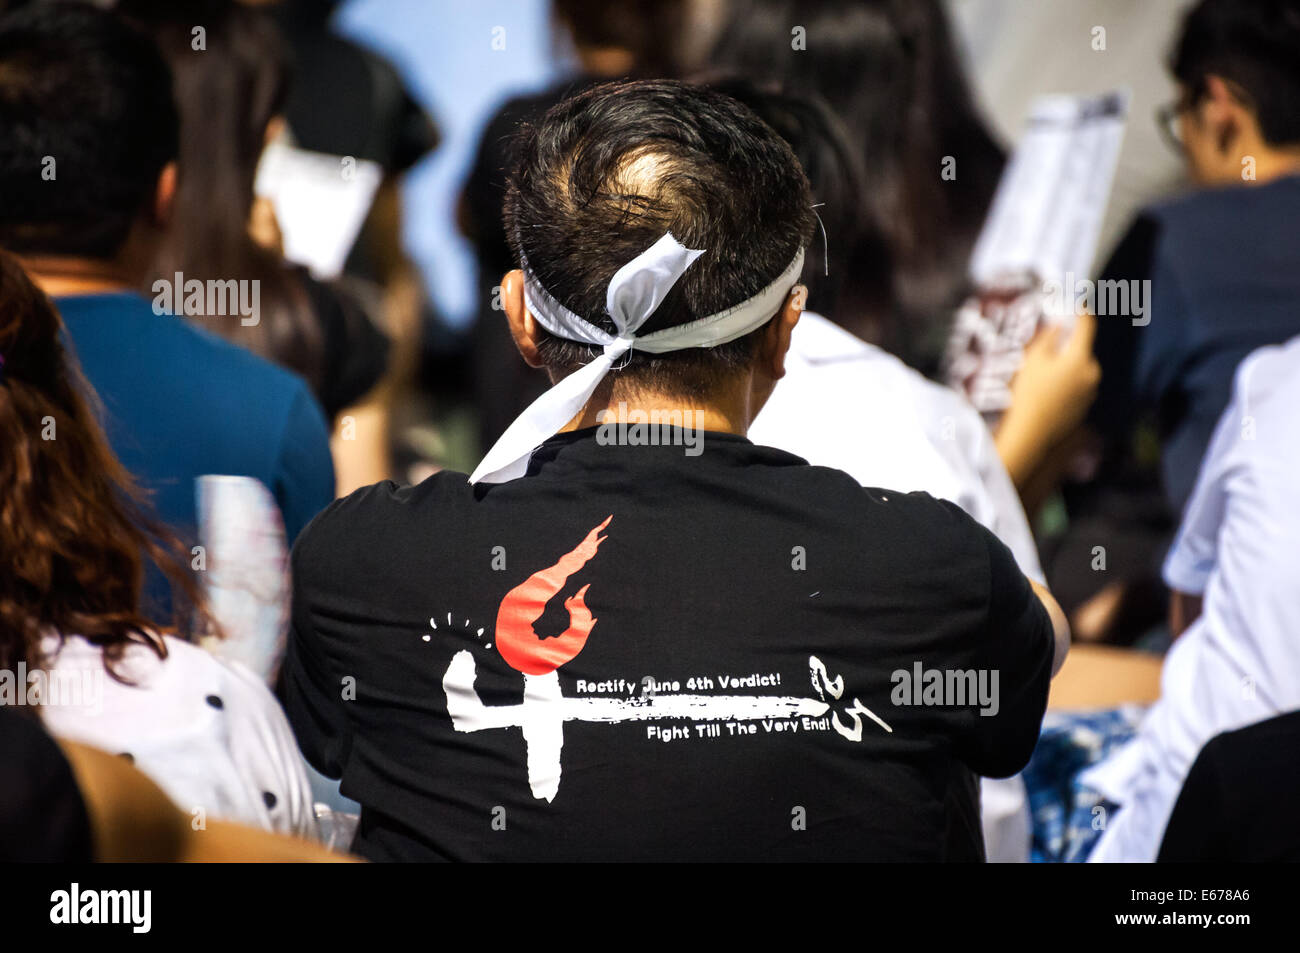 'Rectify June 4th Verdict' t-shirt at the 25th anniversary of the Tiananmen Square massacre, Hong Kong Stock Photo